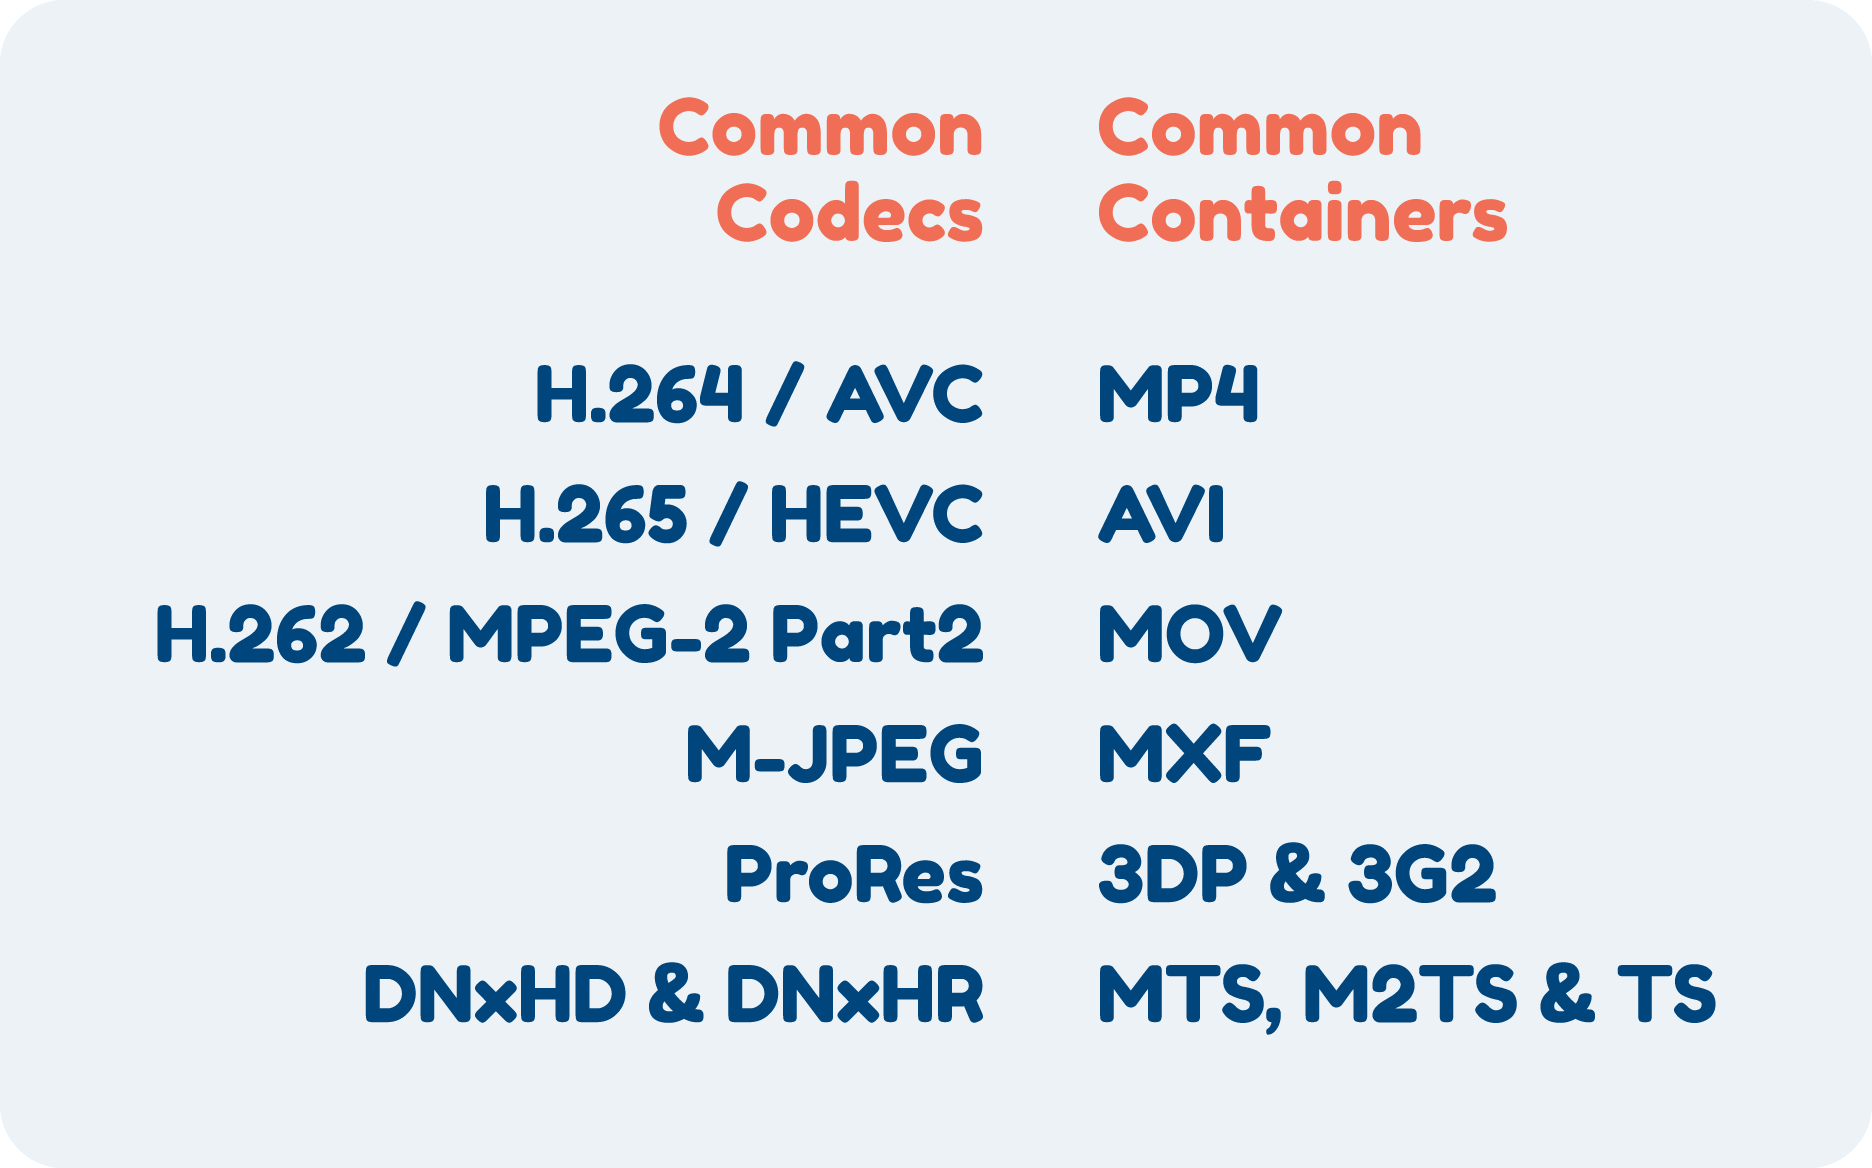 Common video codecs and containers combinations